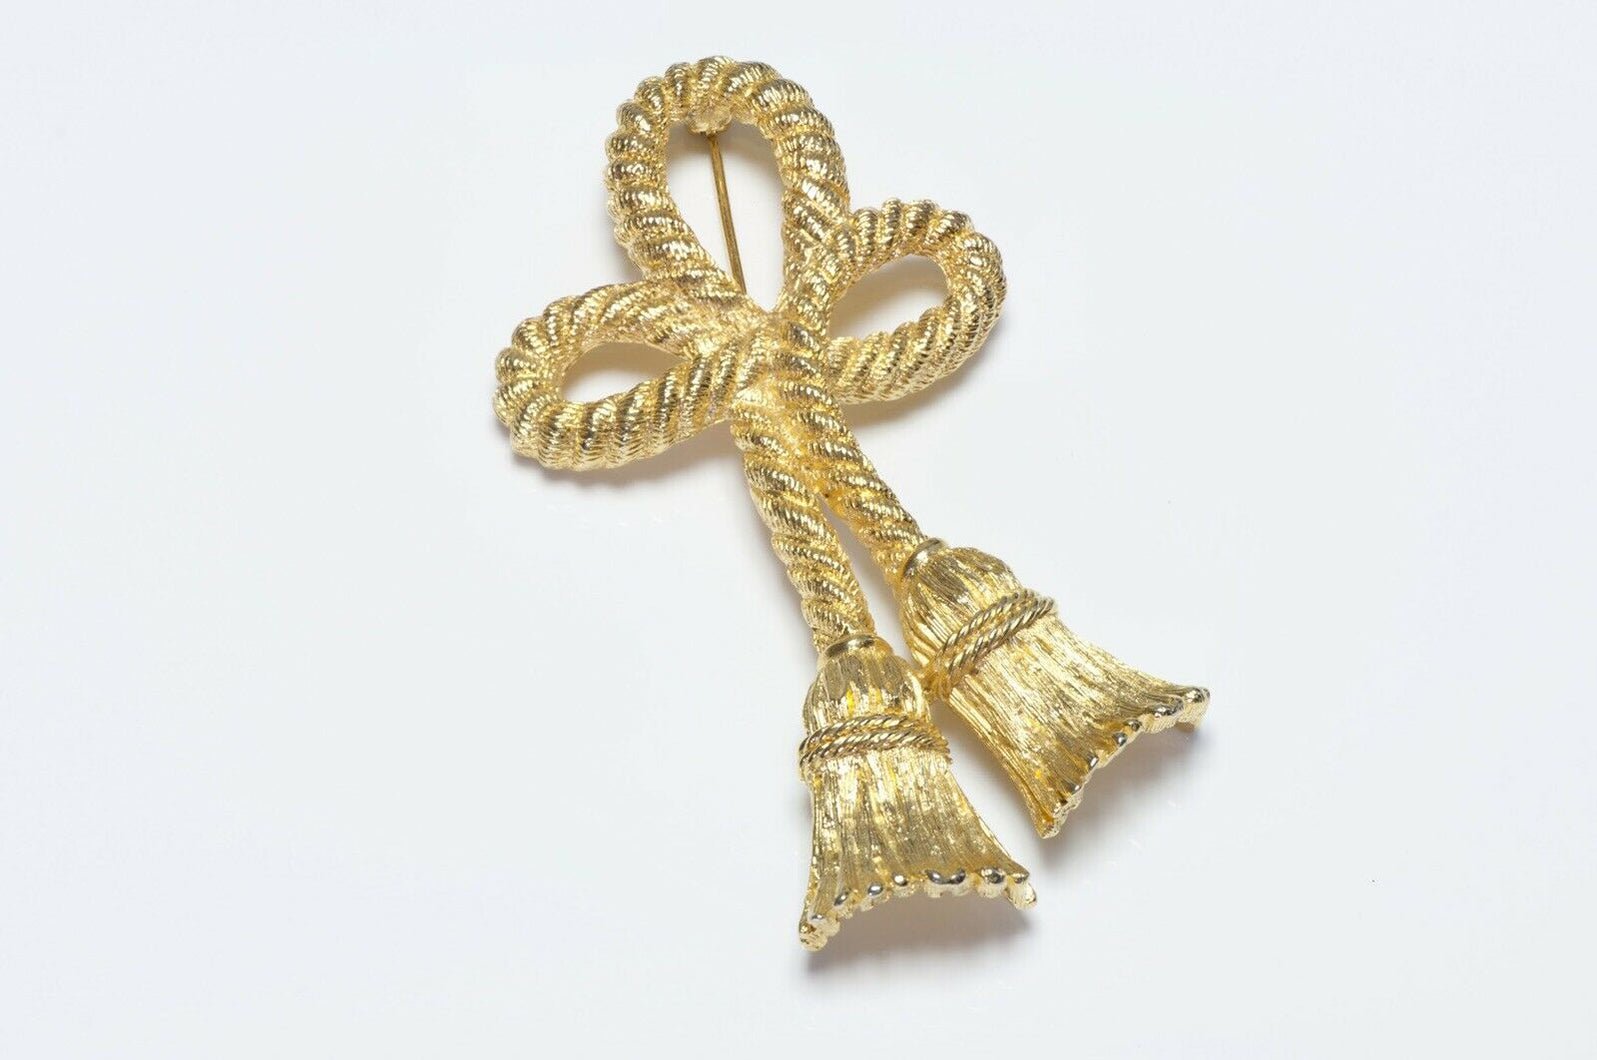 GIVENCHY Paris Twist Rope Bow Brooch